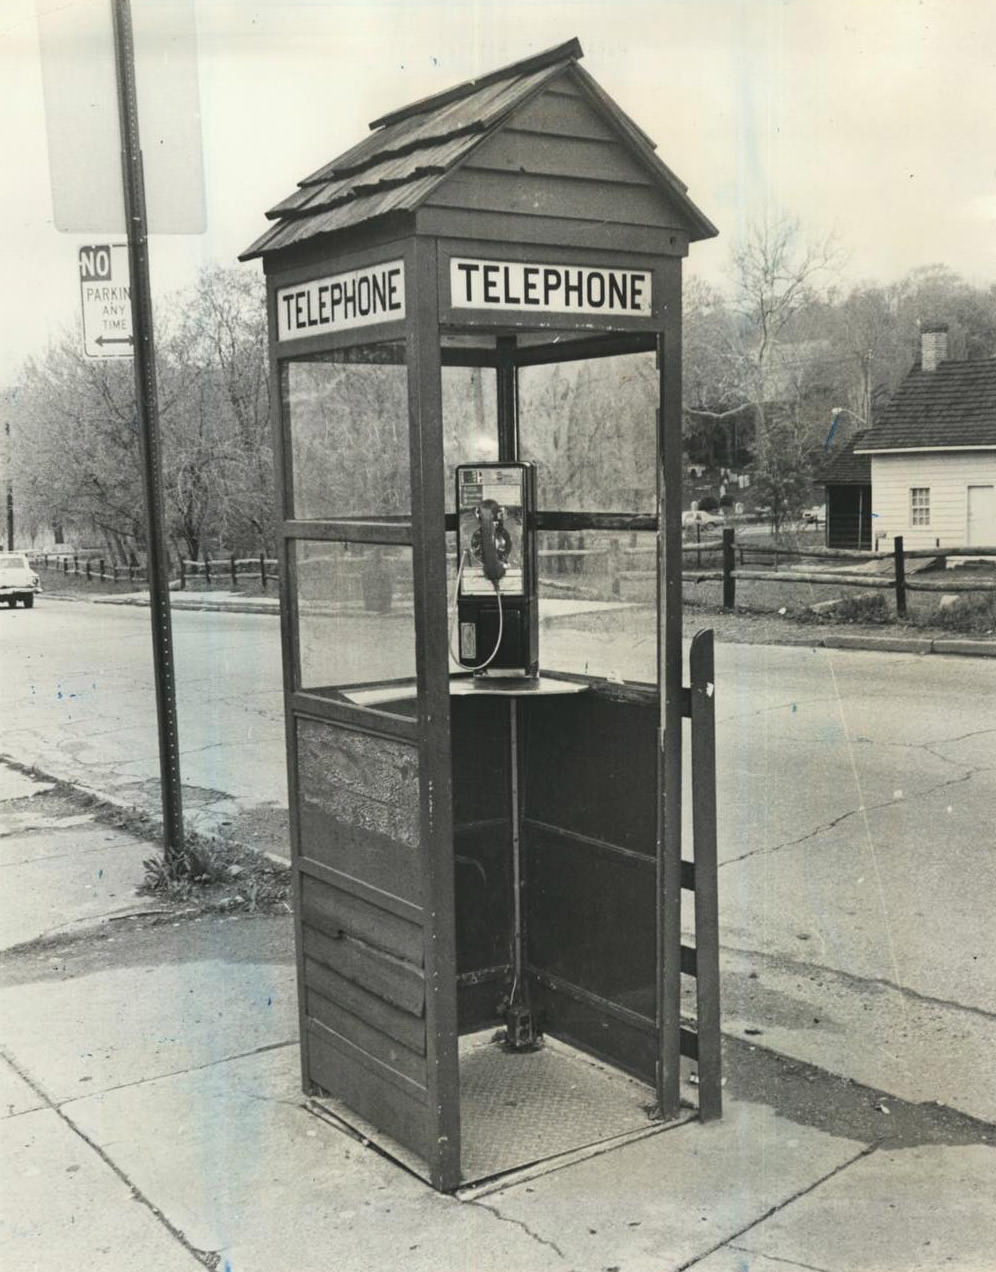 Log Cabin Telephone Booth At Richmondtown Restoration Is Consistent With The Theme Of The Area, 1978.